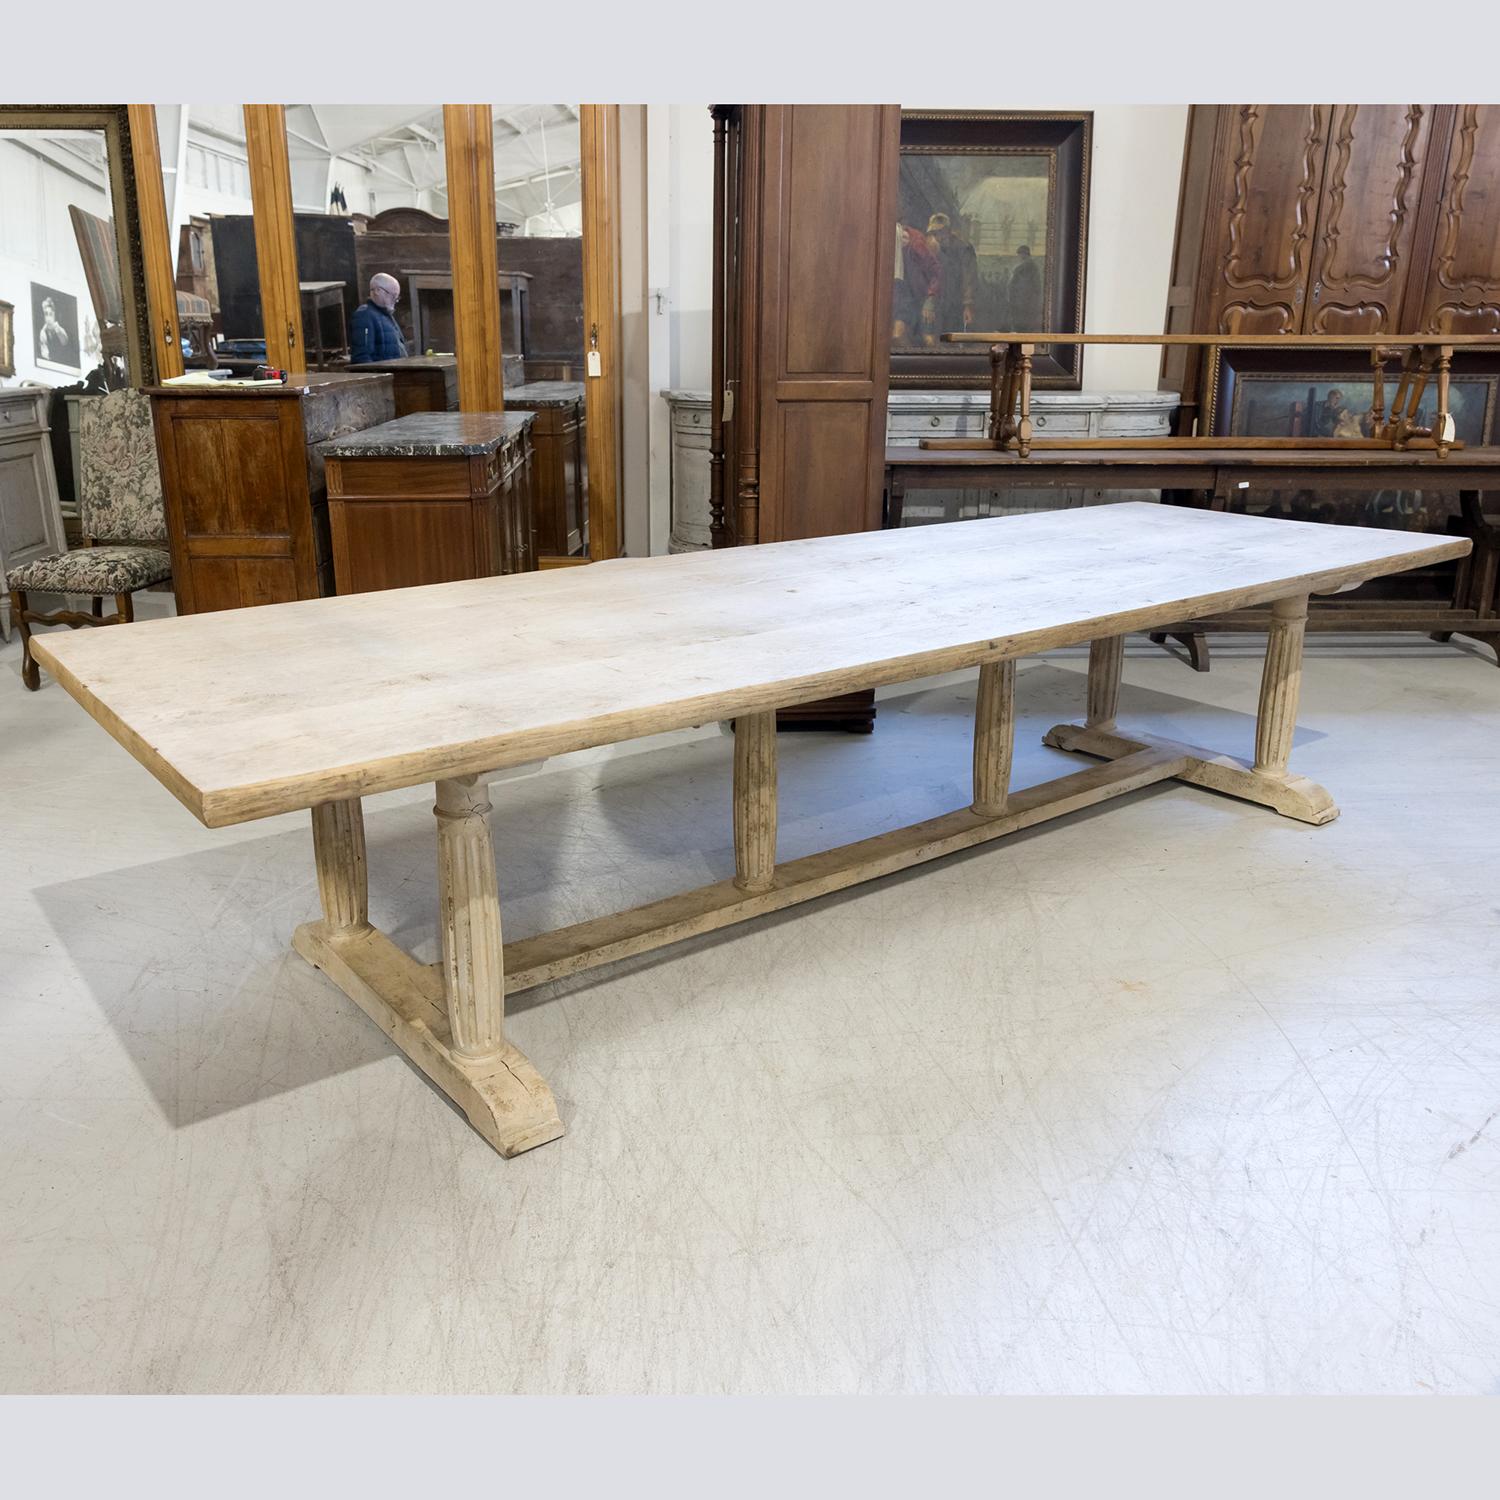 A 19th century French Provençal trestle dining table handcrafted by talented artisans near Avignon of solid oak that's been bleached or washed to a natural finish and hand waxed to a beautiful patina, circa 1890s. Having a thick rectangular solid